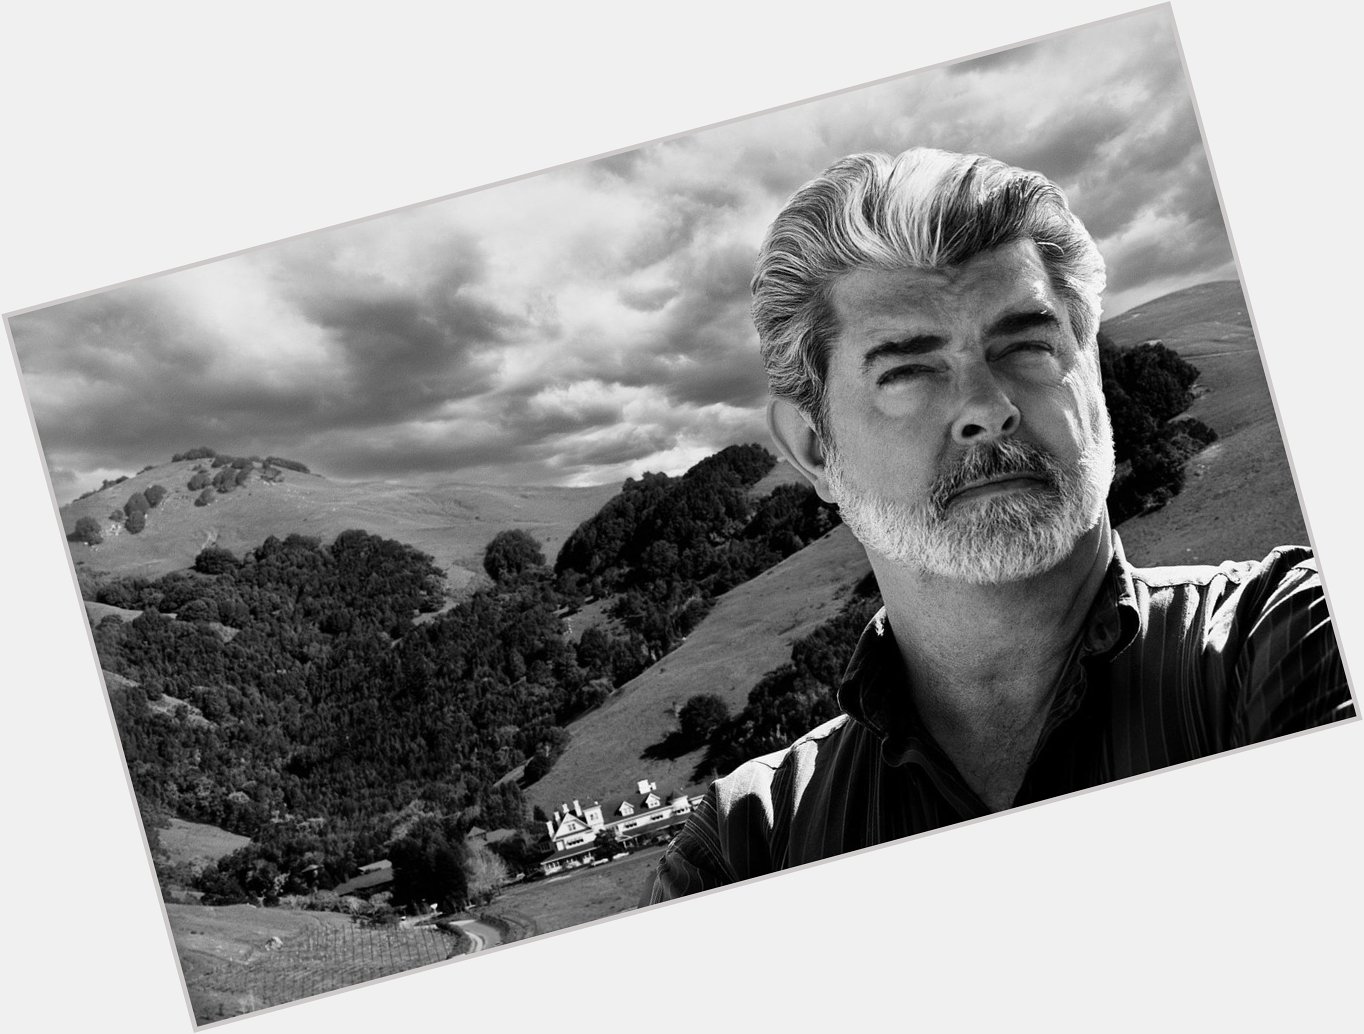 Happy 77th birthday to my hero, the Maker: George Lucas.

Love you. 